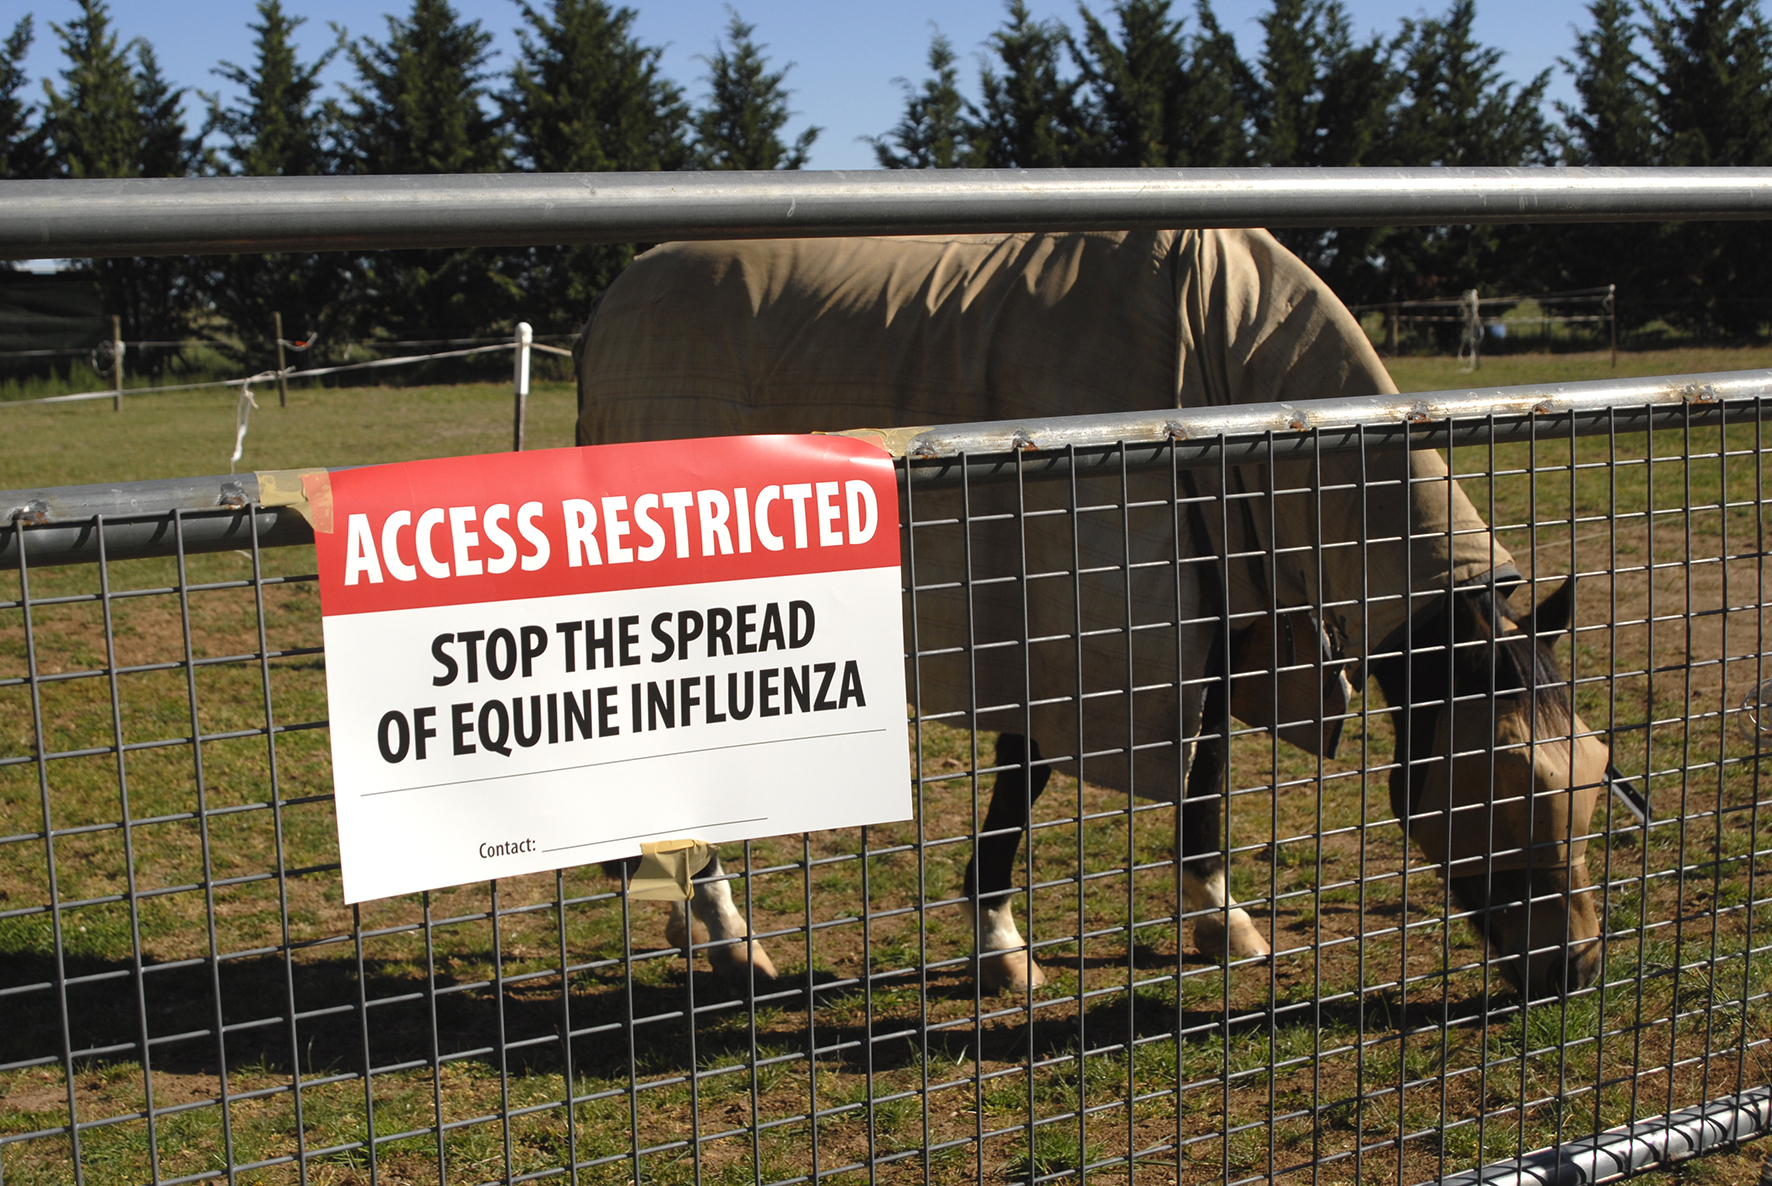 Horse in restricted area to stop the spread of equine influenza